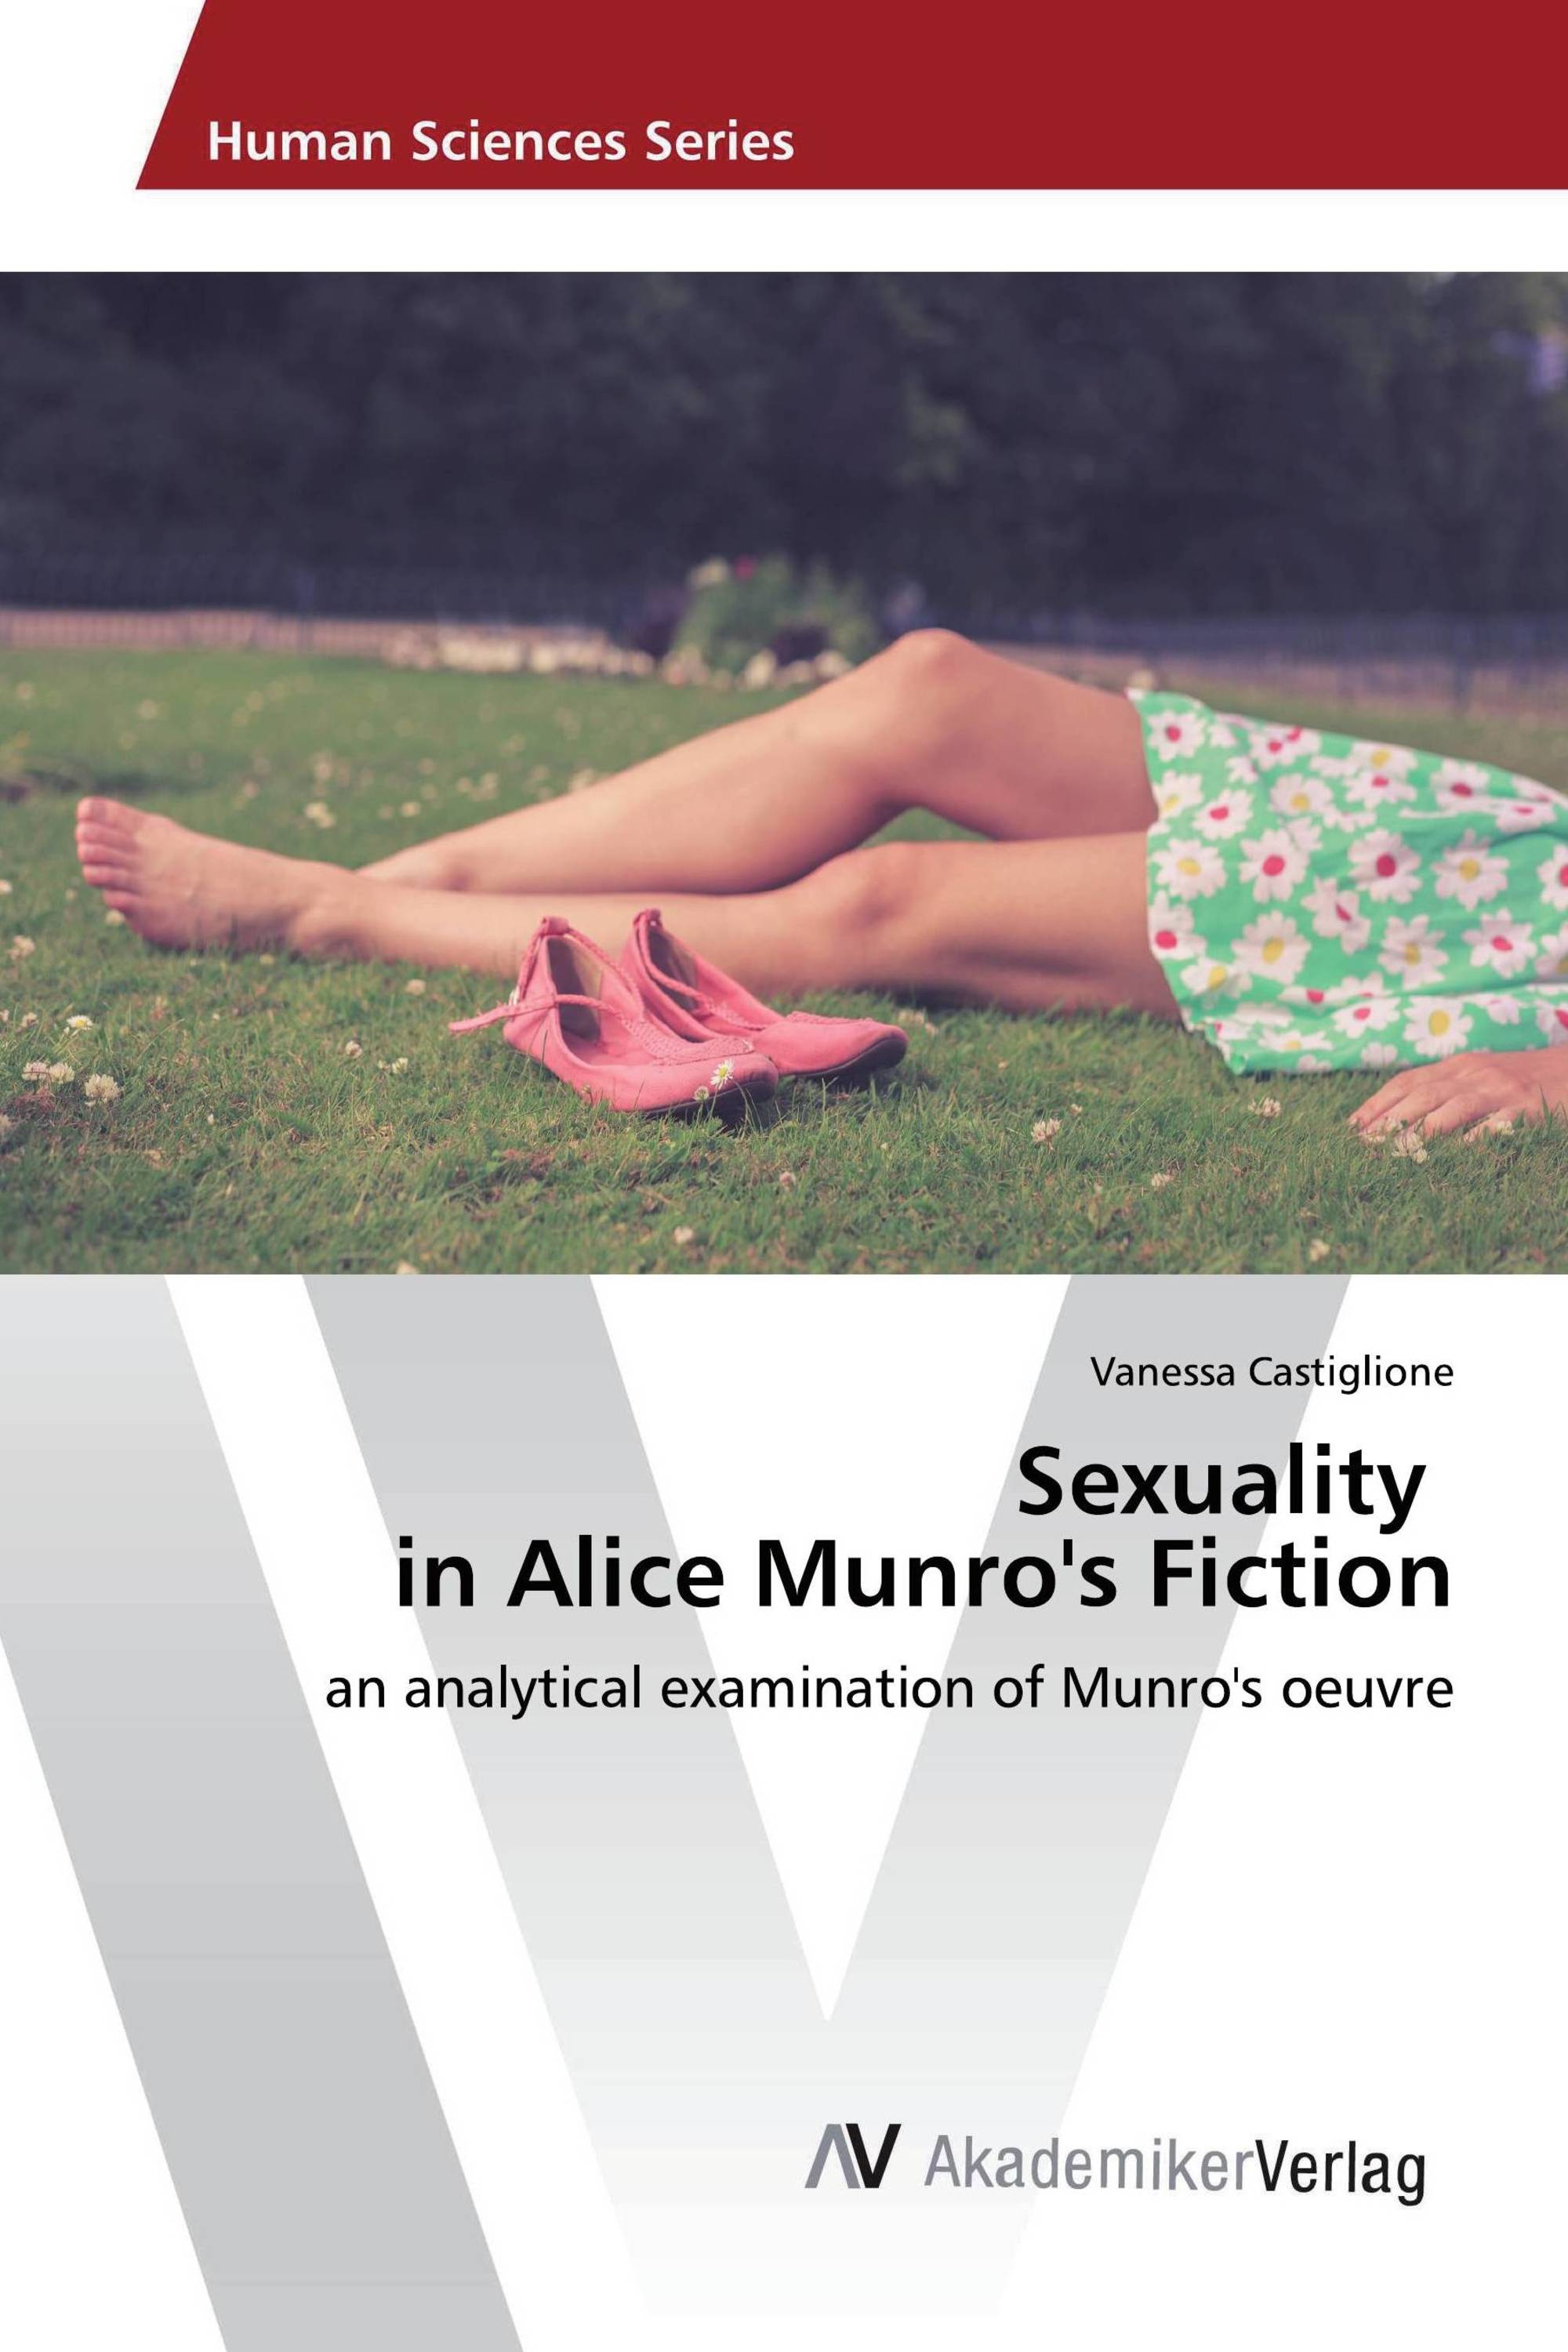 Sexuality in Alice Munro's Fiction